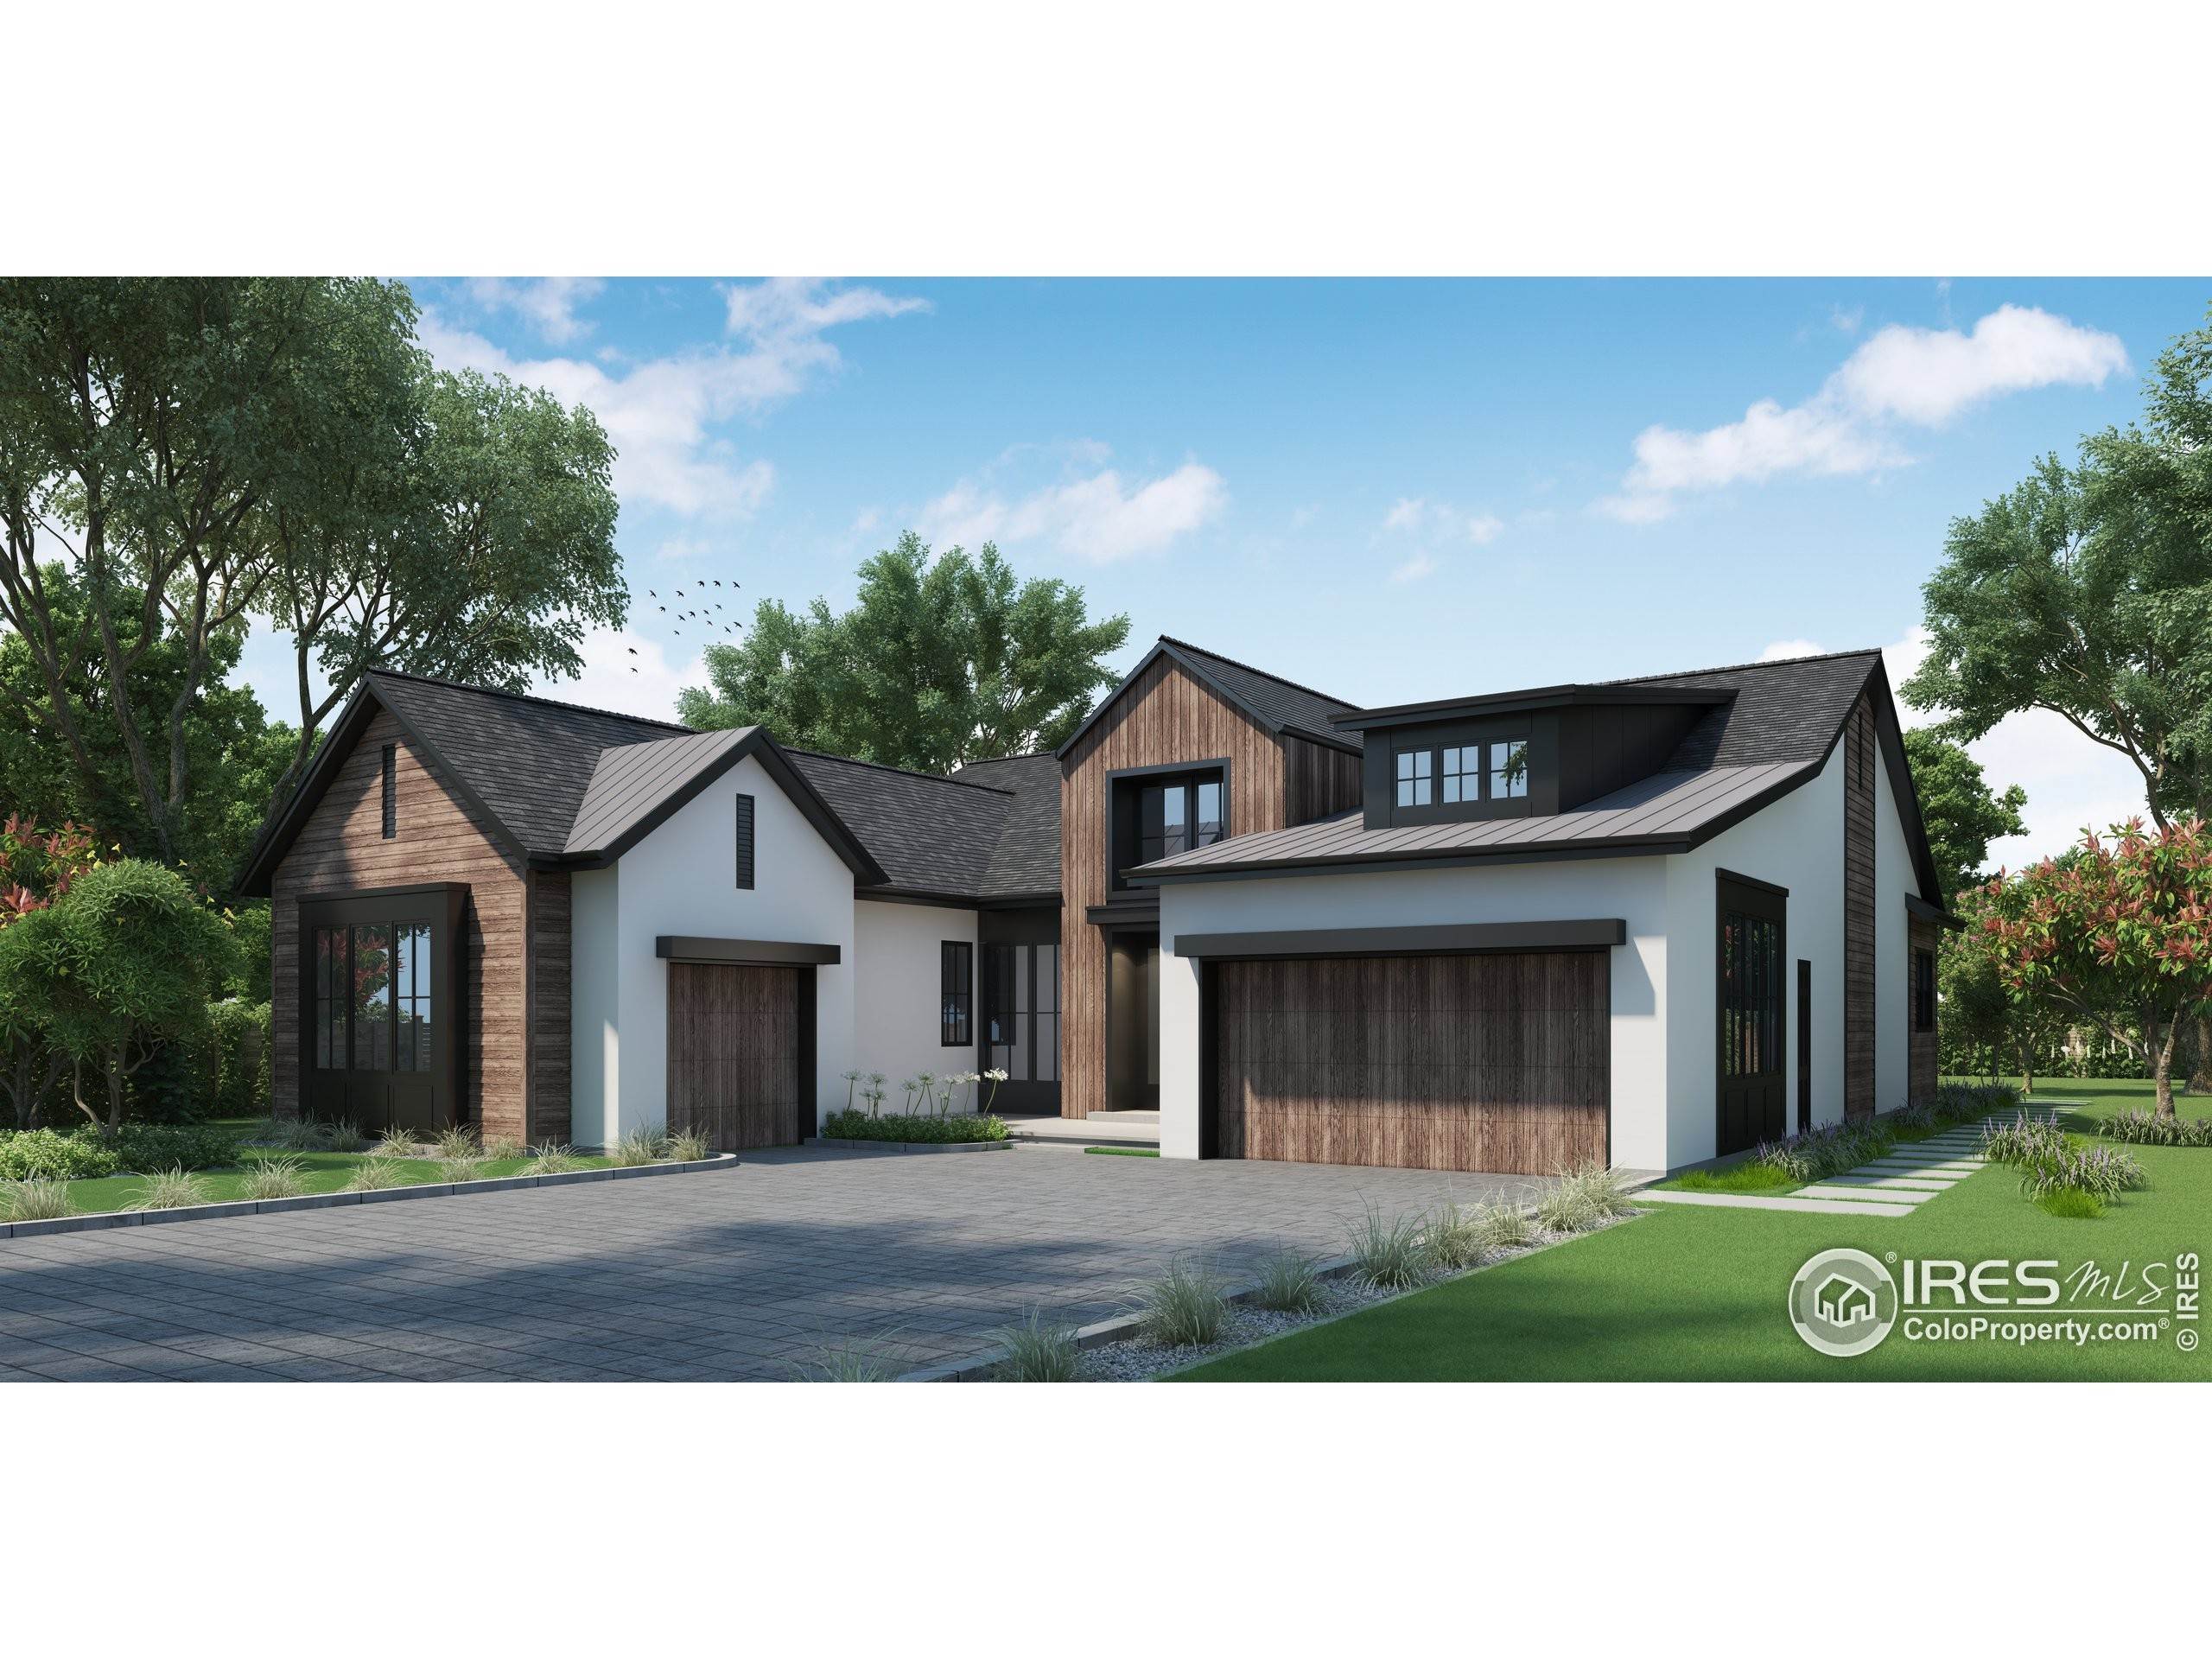 Single Family Homes for Active at 1201 W 144th Court Westminster, Colorado 80023 United States